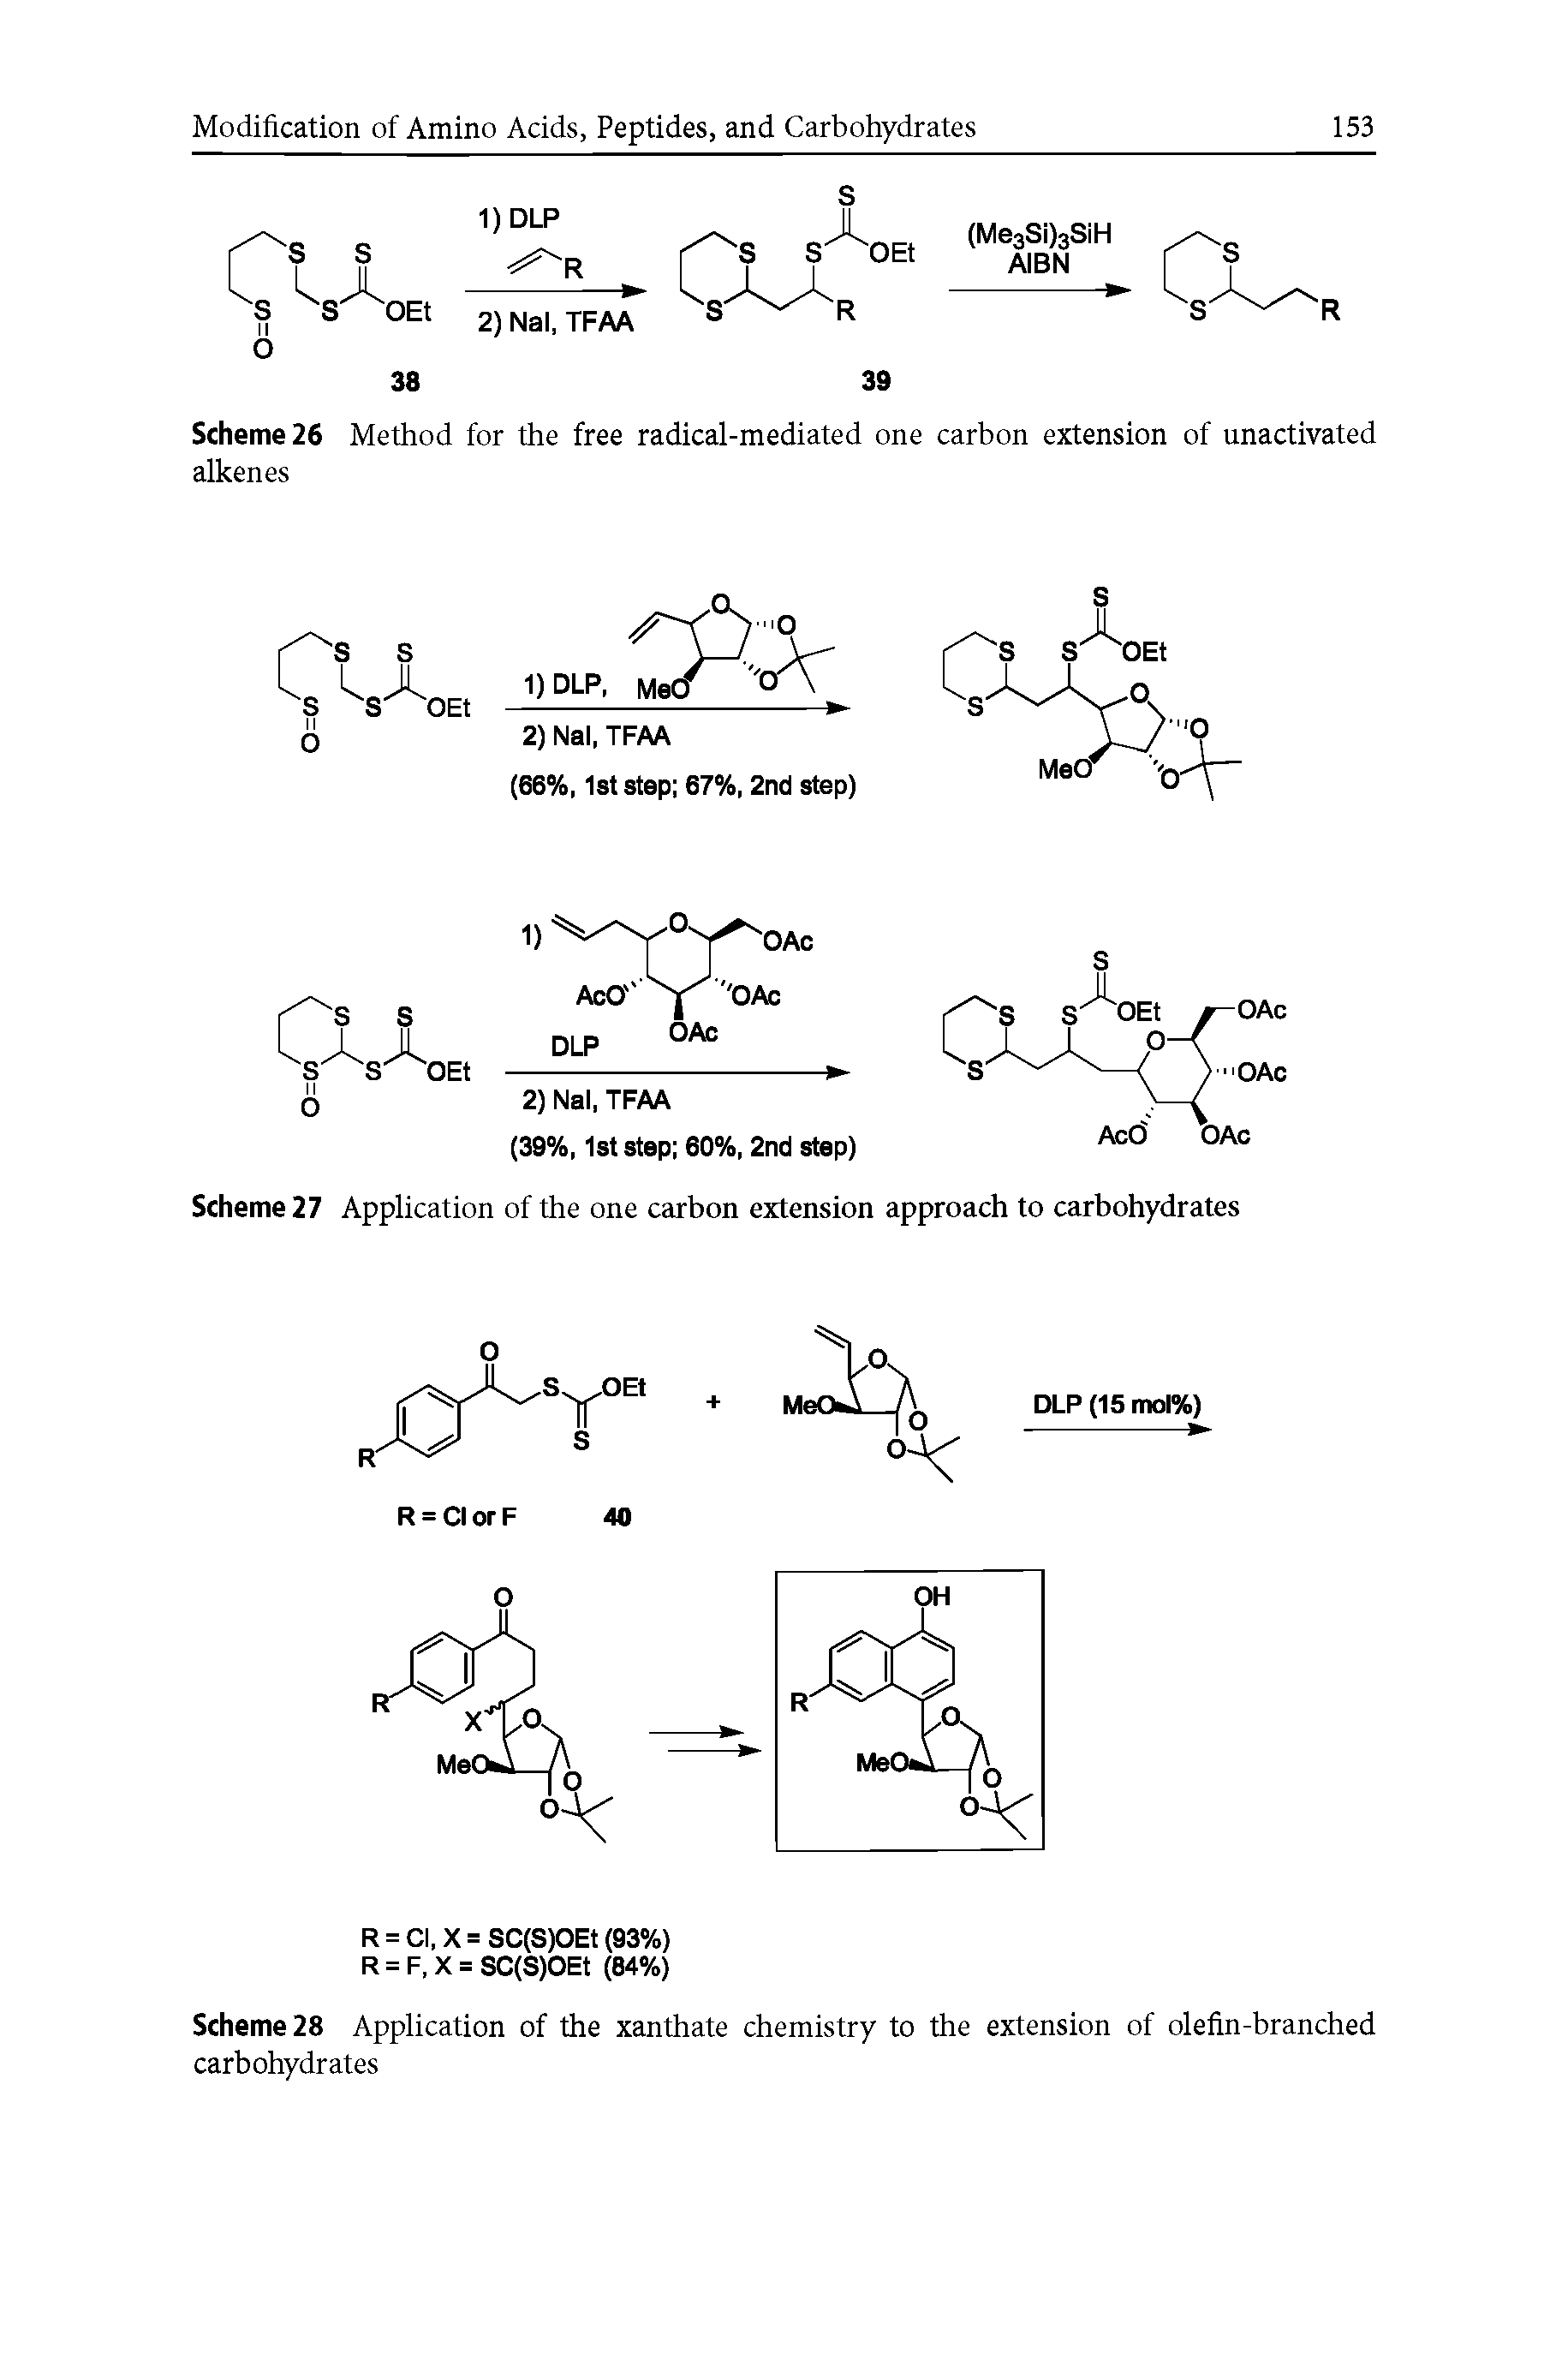 Scheme 28 Application of the xanthate chemistry to the extension of olefin-branched carbohydrates...